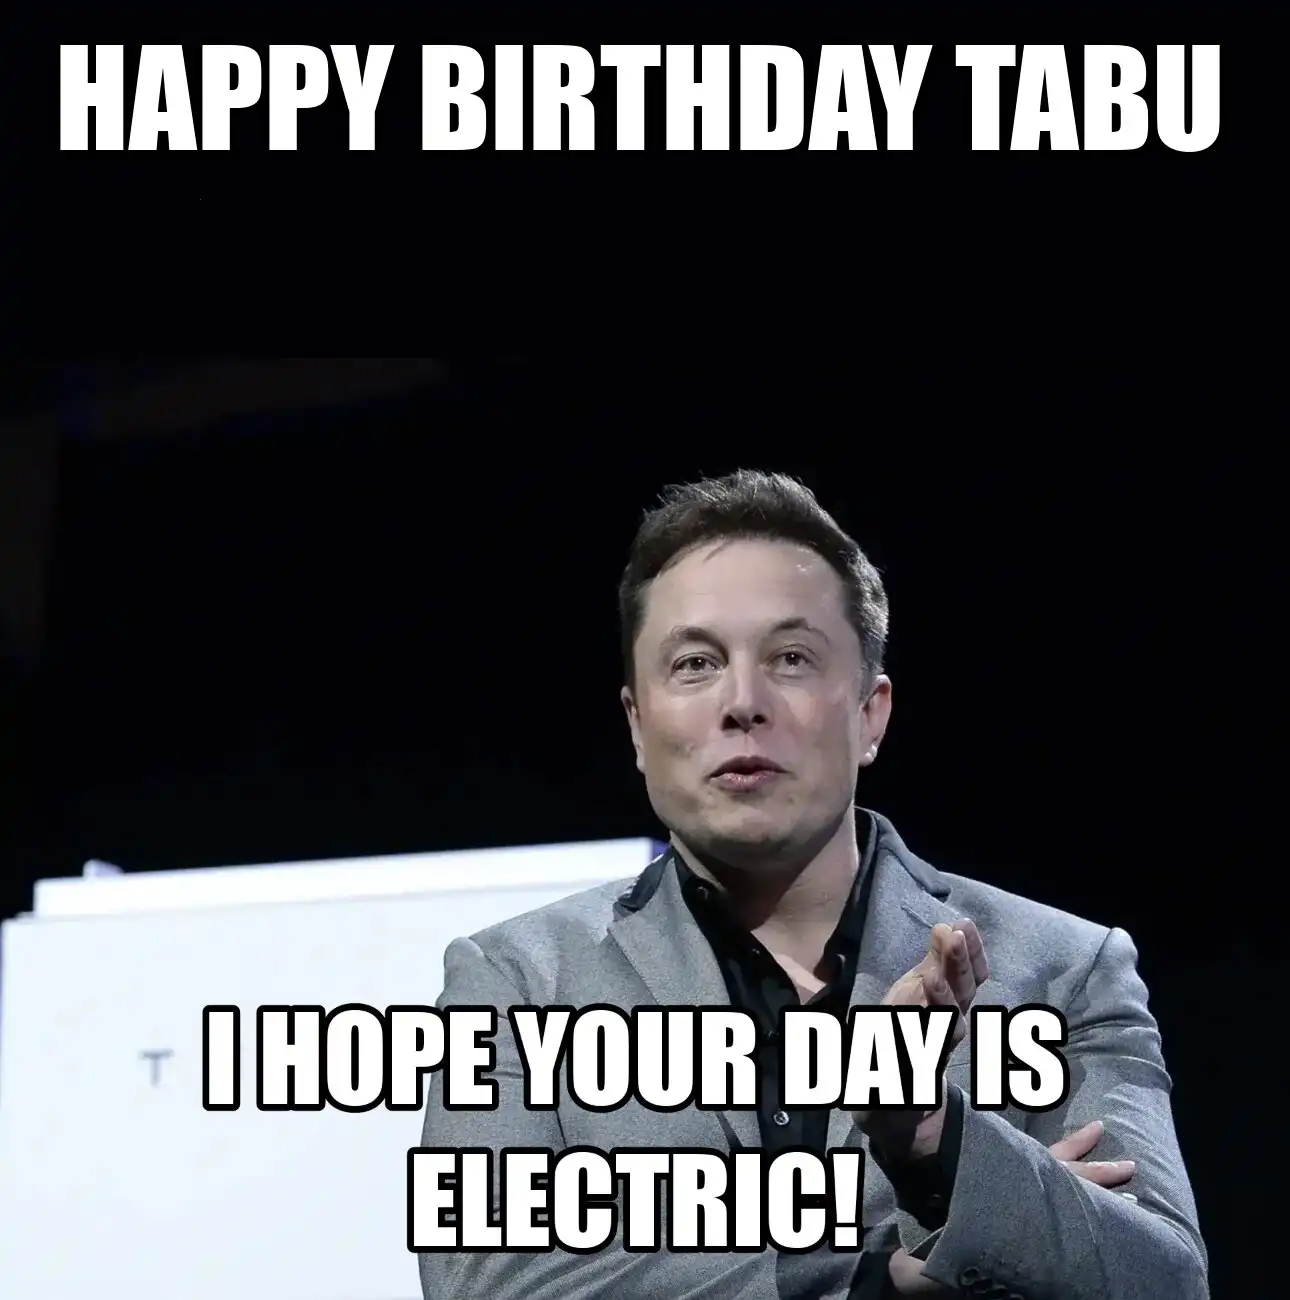 Happy Birthday Tabu I Hope Your Day Is Electric Meme